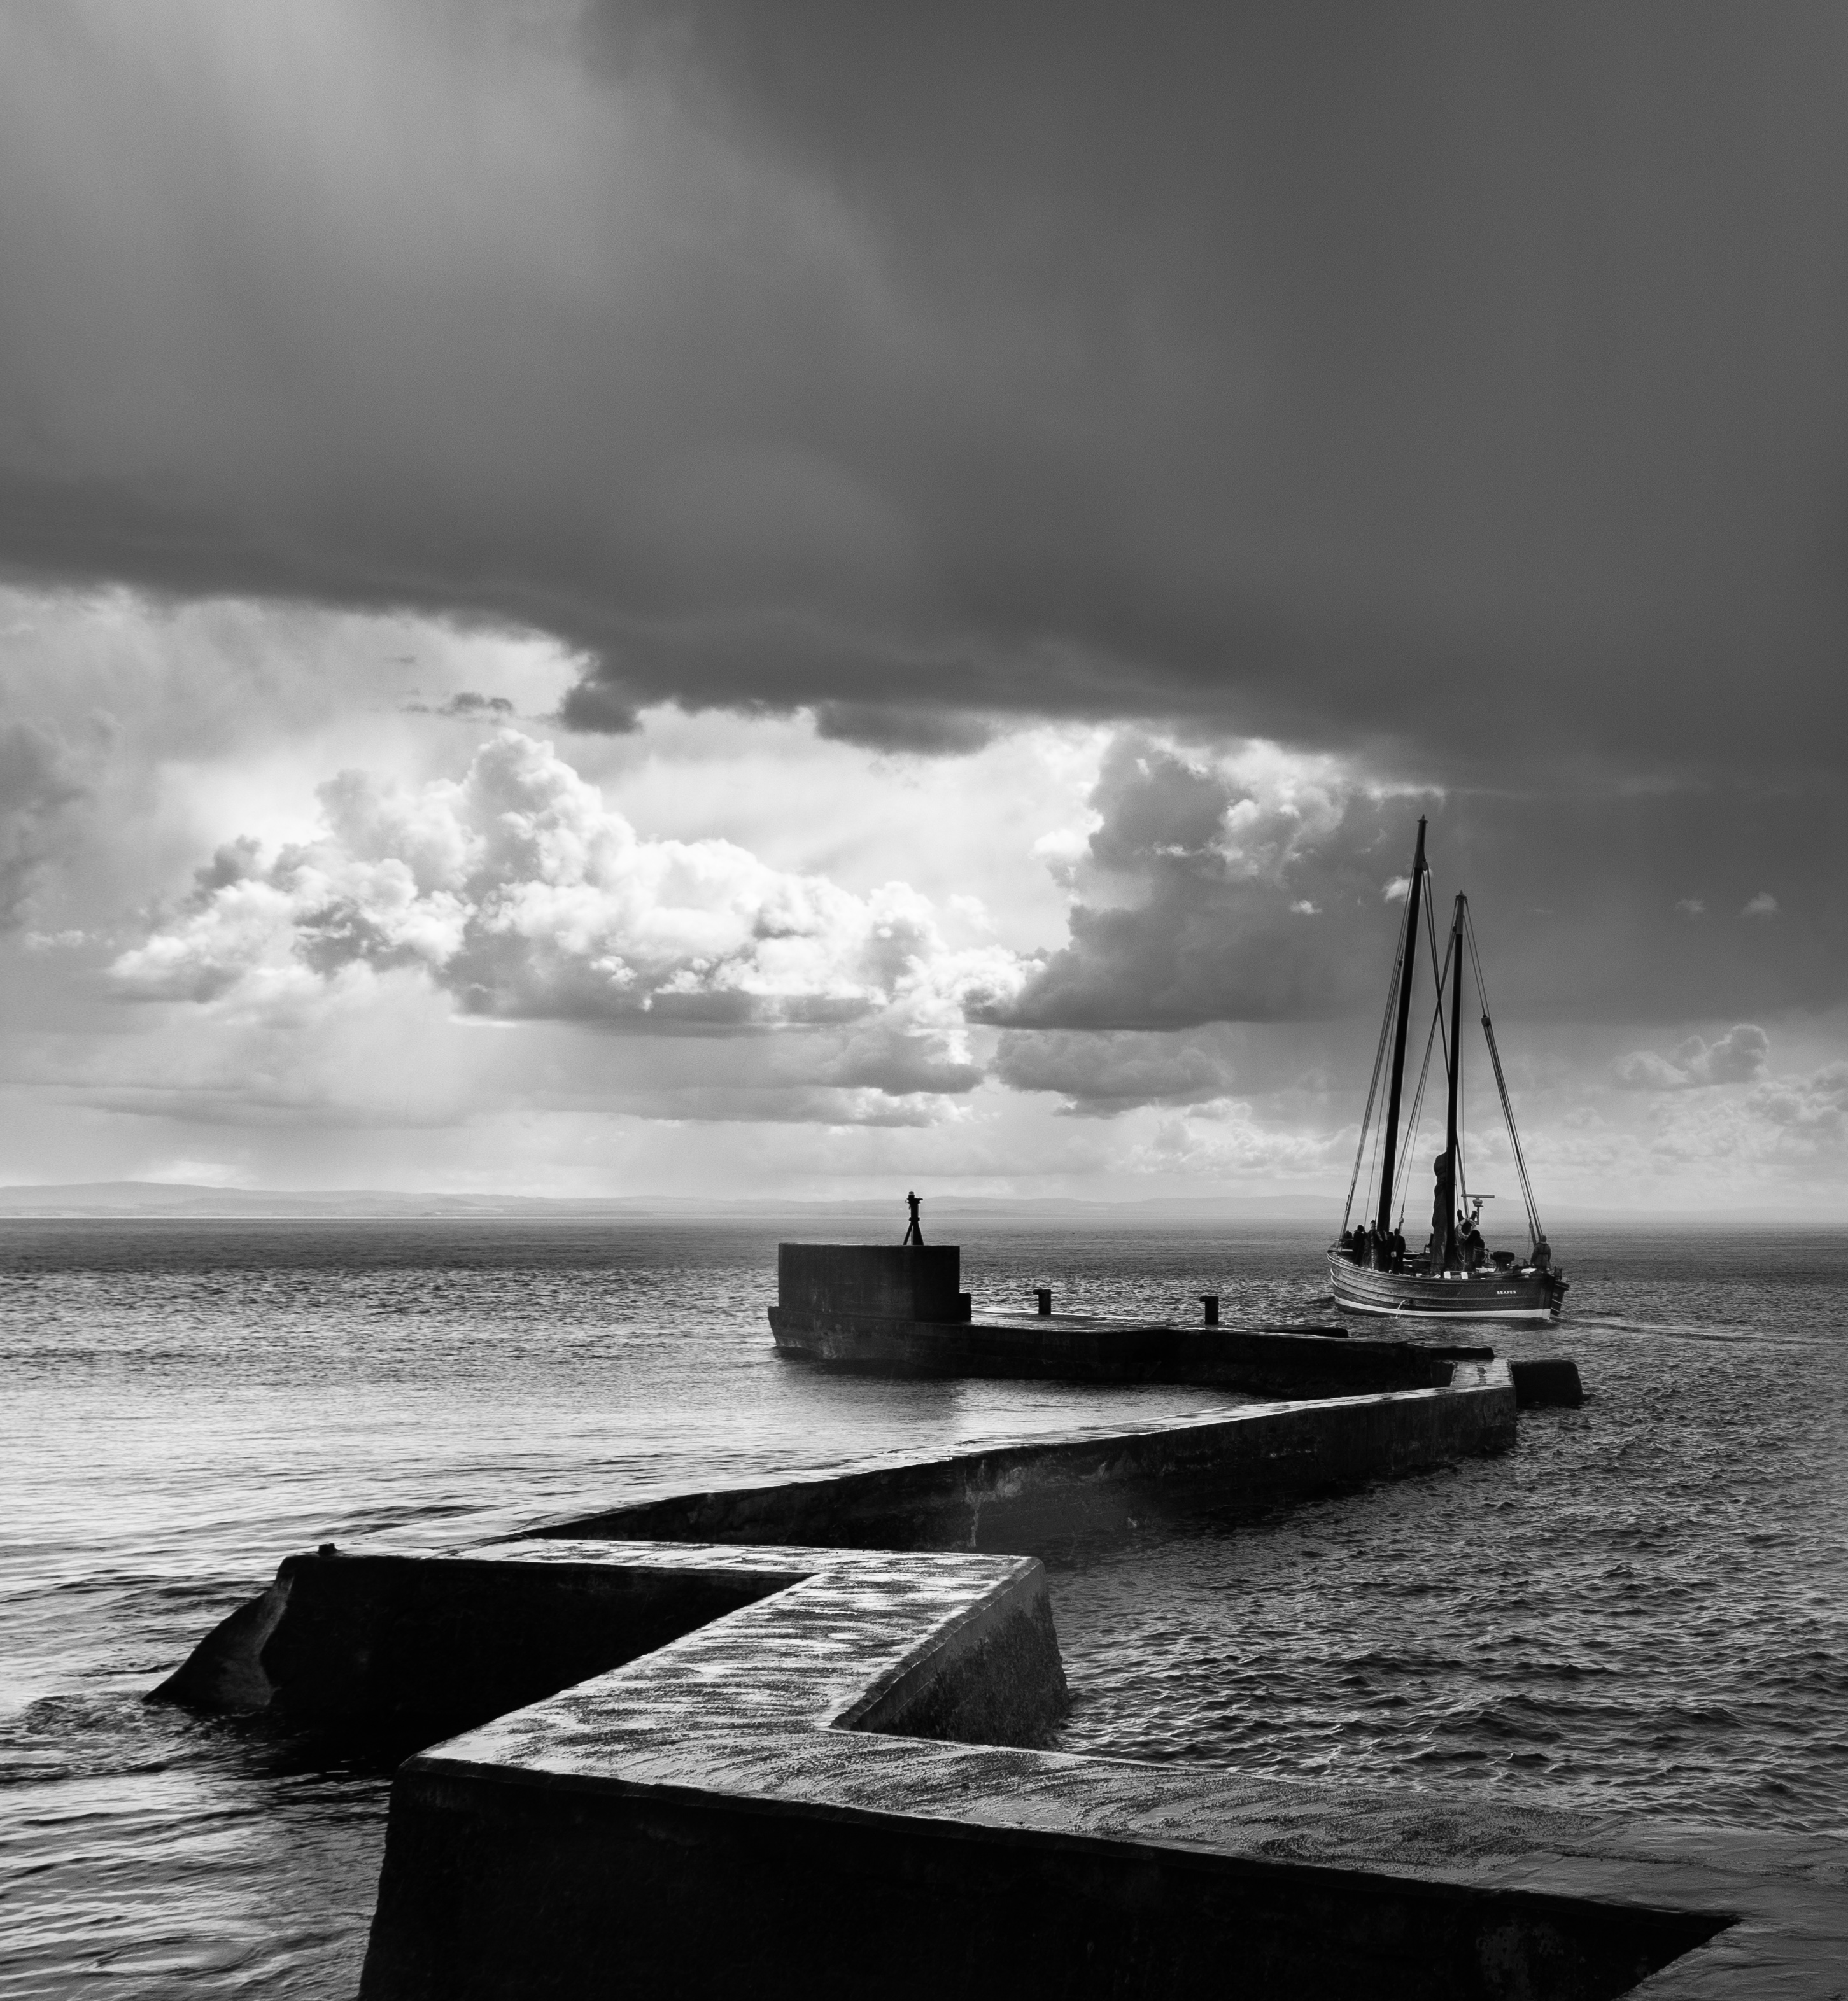 Reaper passing The Blocks at St Monans by Alistair Ramsey